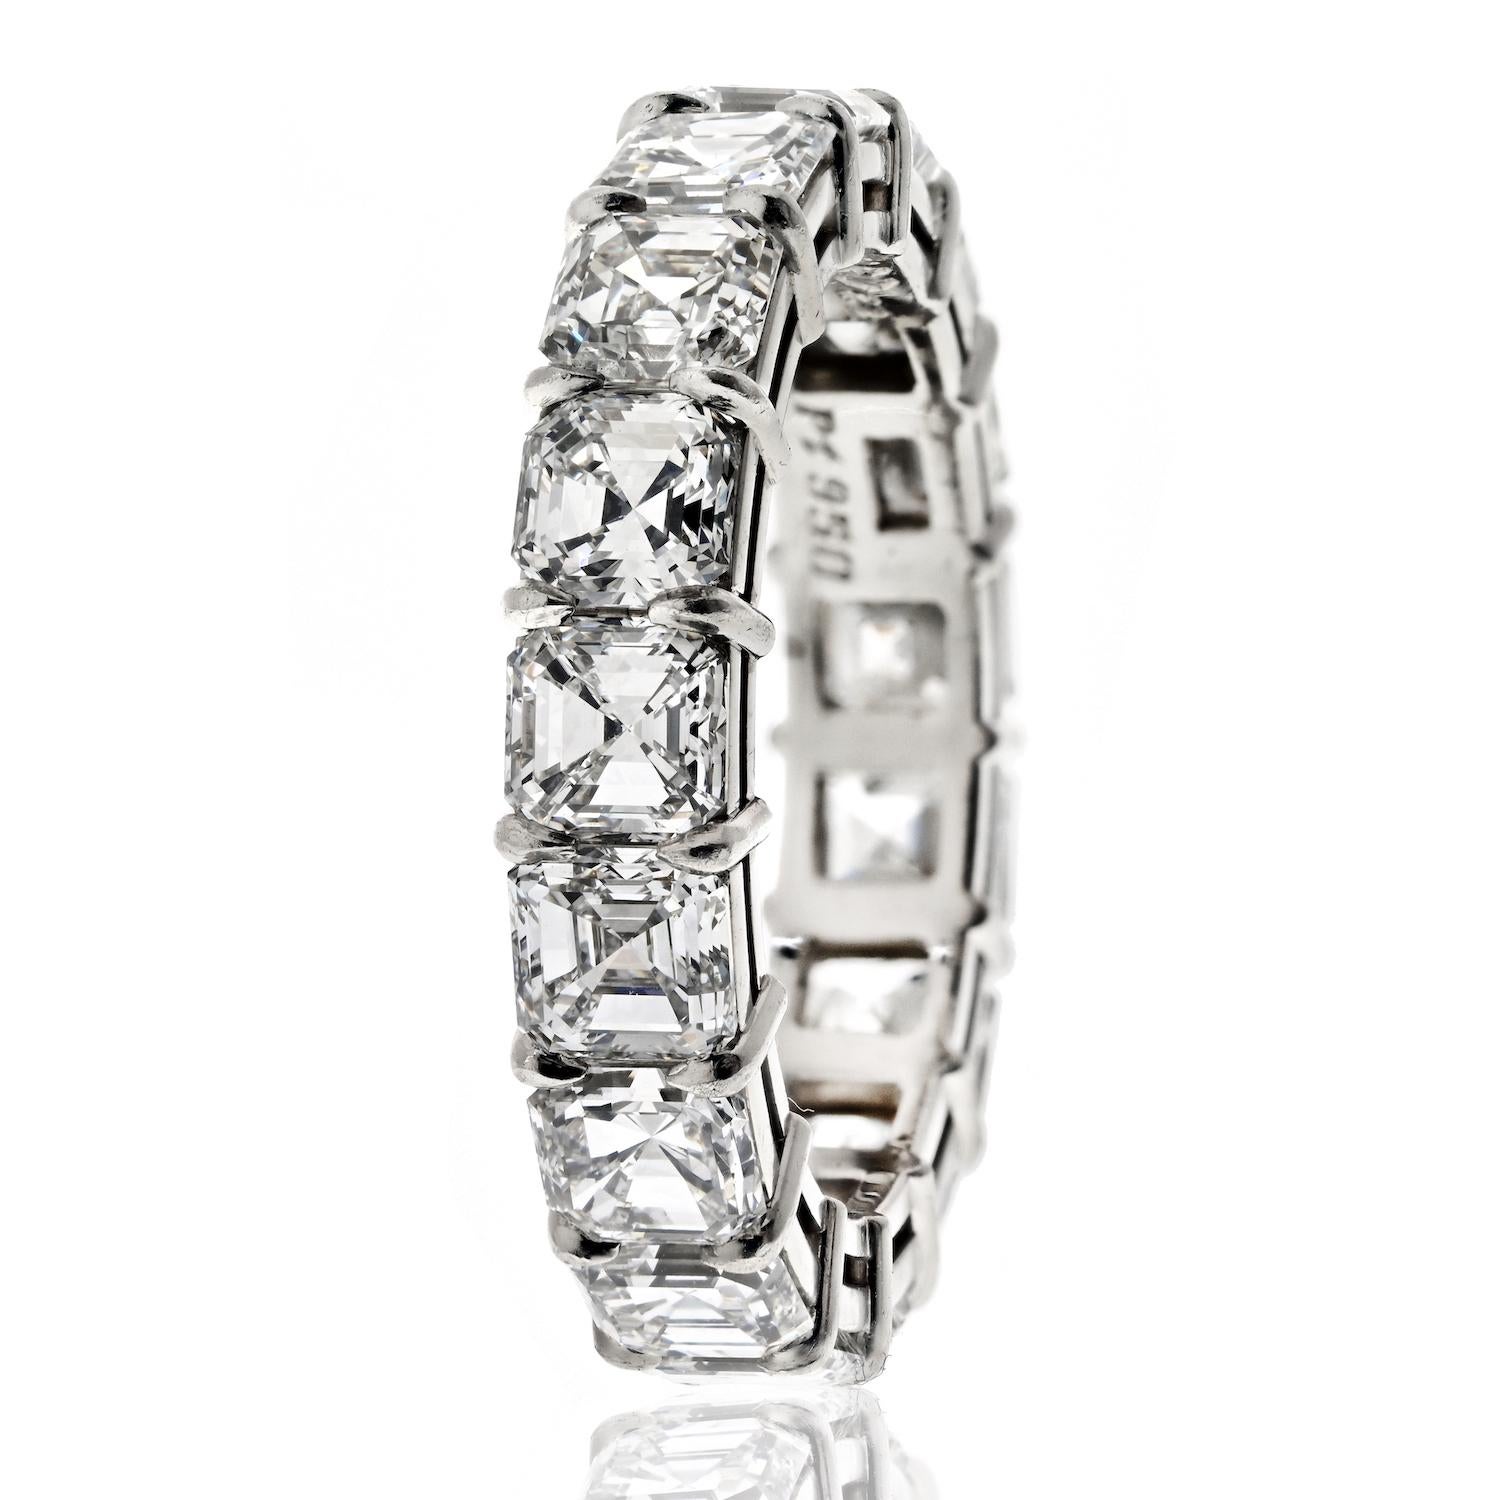 Handmade Platinum 7.82cttw Diamond Asscher Cut Eternity Band In Excellent Condition For Sale In New York, NY